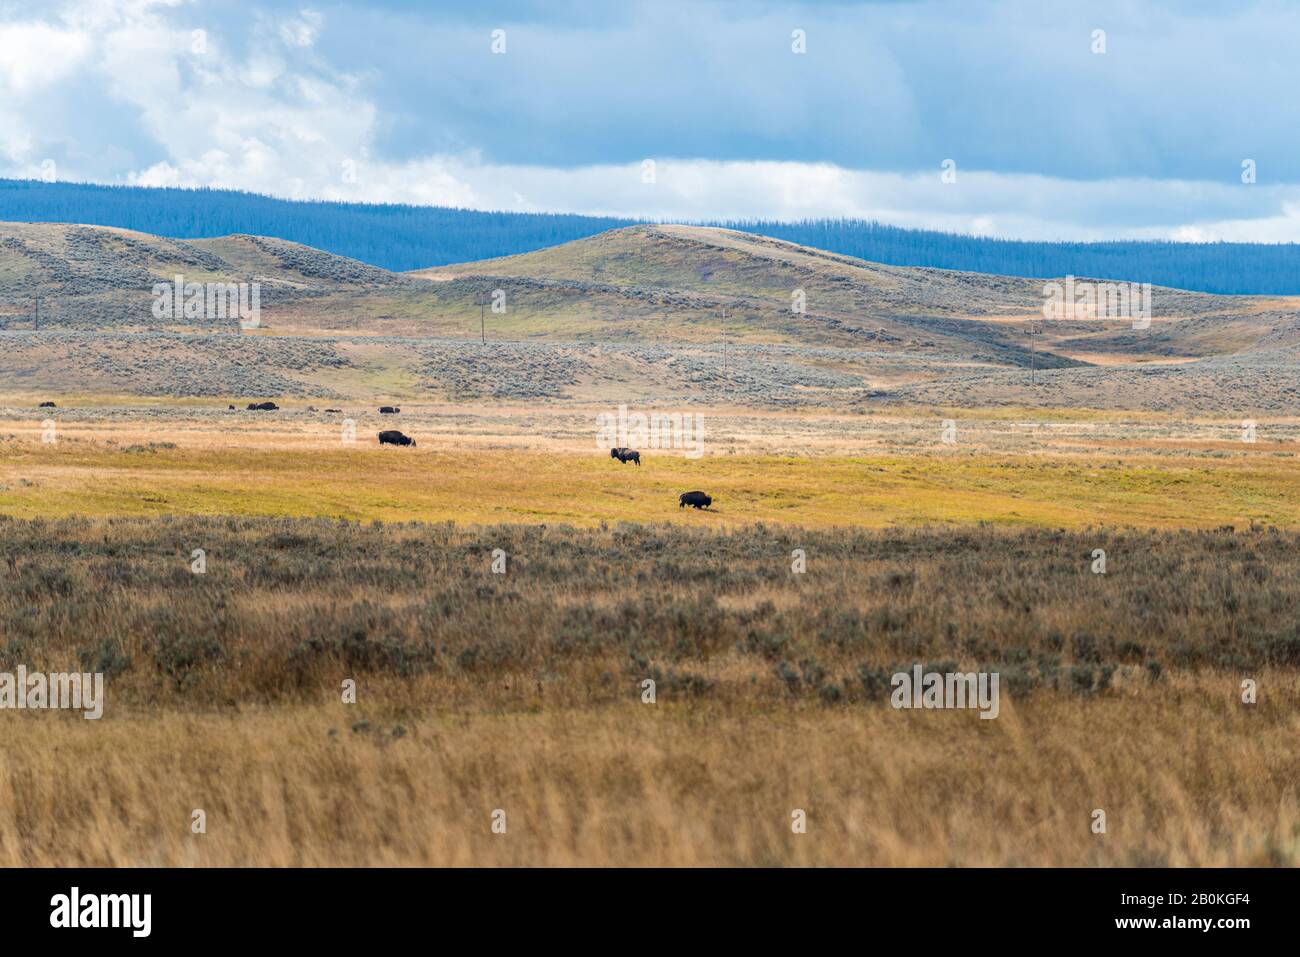 Looking out over brown grassy plains at hills and wildlife beyond under cloudy skies. Stock Photo